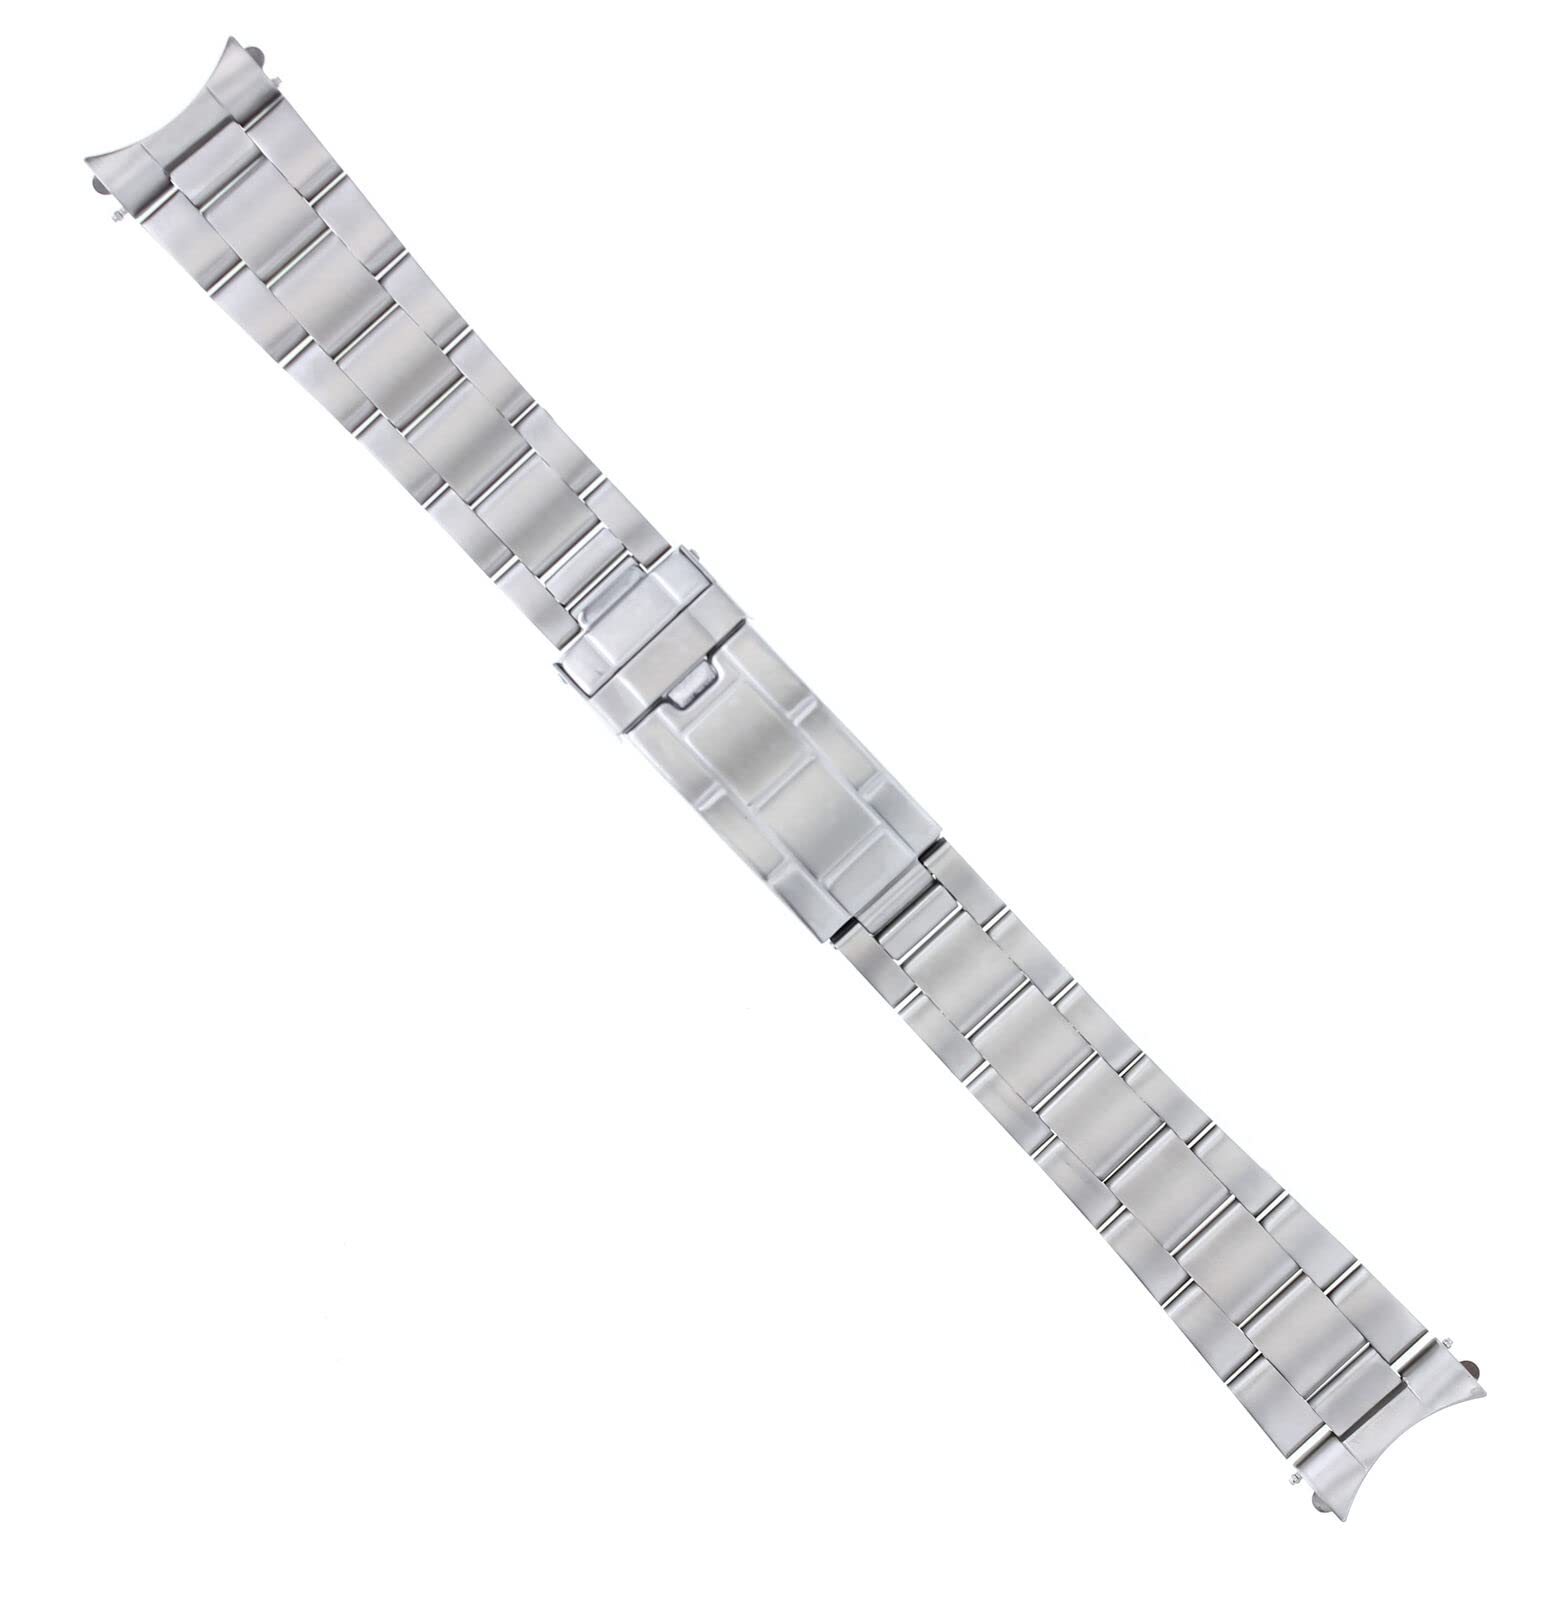 Ewatchparts 20MM OYSTER WATCH BAND SOLID LINK BRACELET COMPATIBLE WITH ROLEX DATEJUST 1601 1603 FLIPLOCK